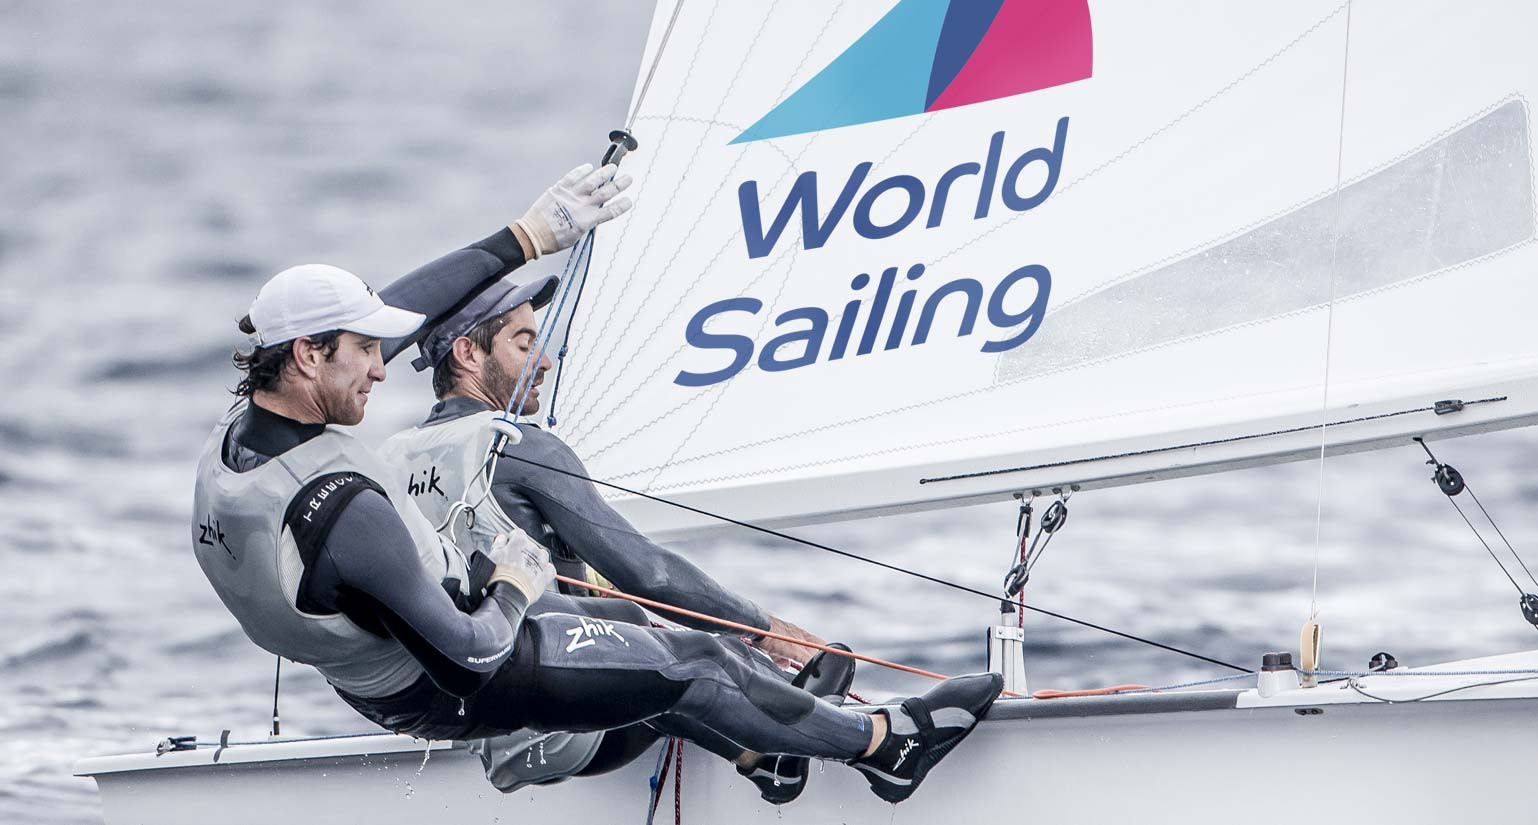 New Zealand lawyer to head World Sailing Governance Commission